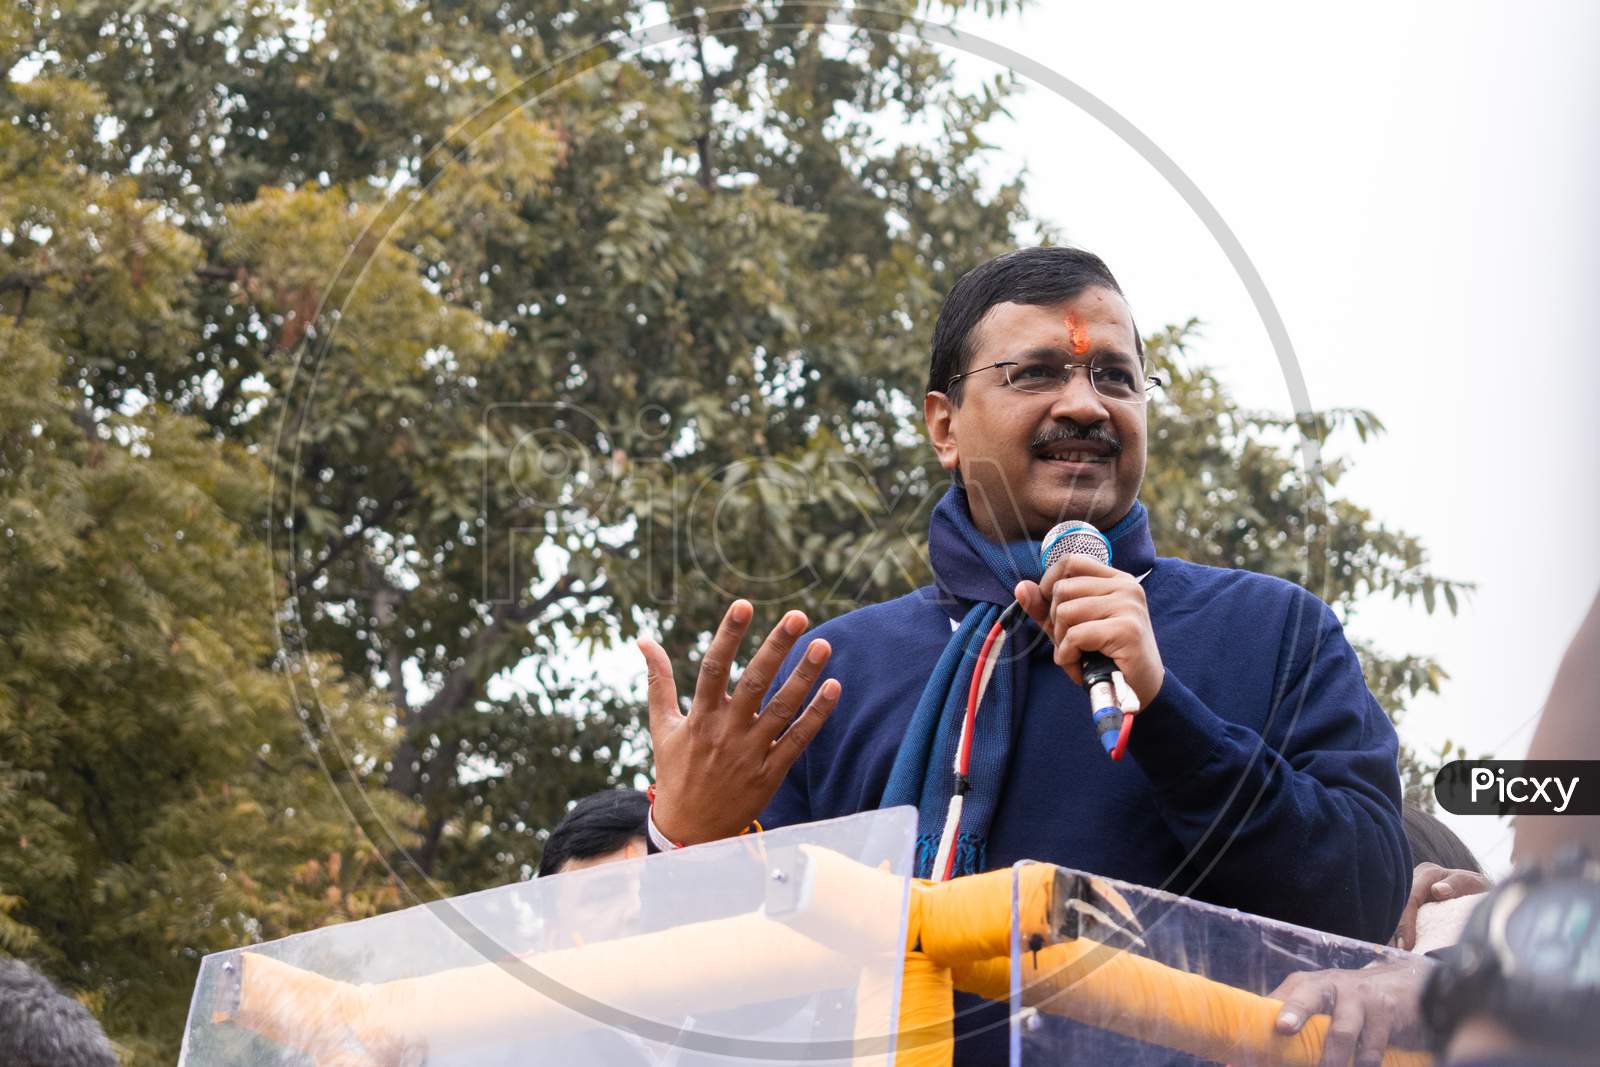 Arvind Kejriwal, national convener of the Aam Aadmi Party AAP, addressing people during a campaign for Delhi Assembly Election 2020